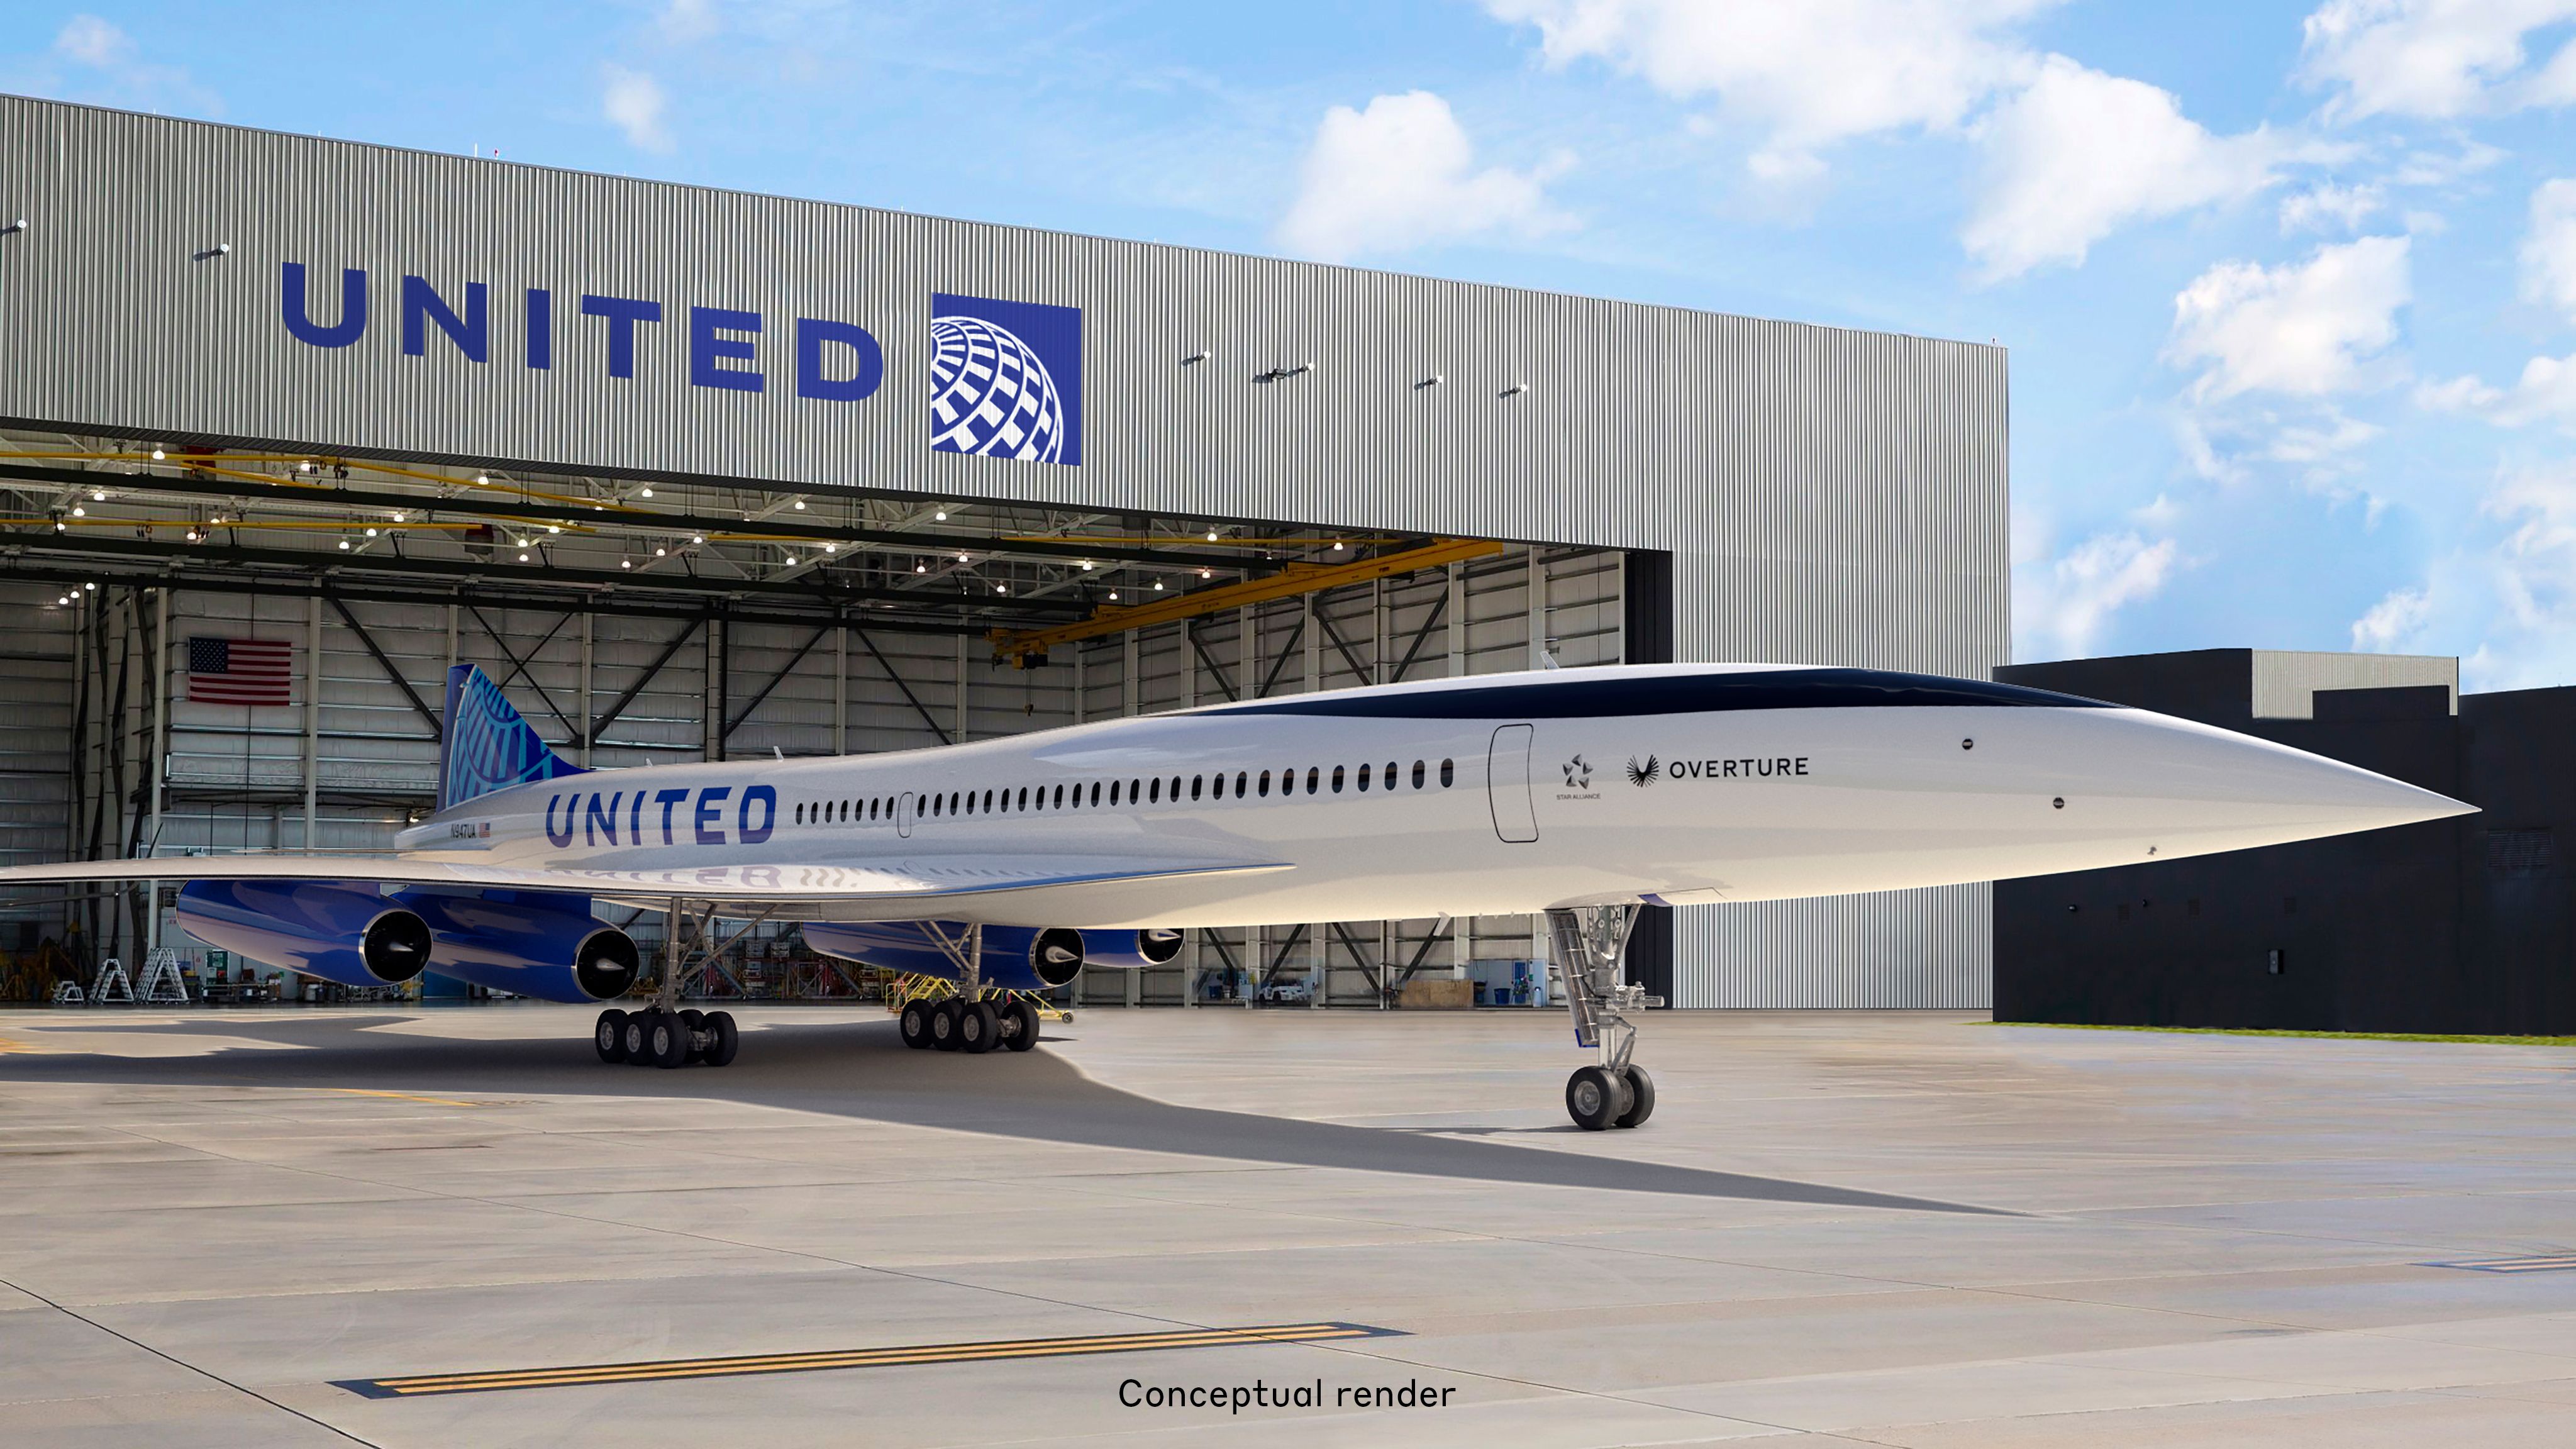 A render of a United Airlines Boom Overture near a hangar.